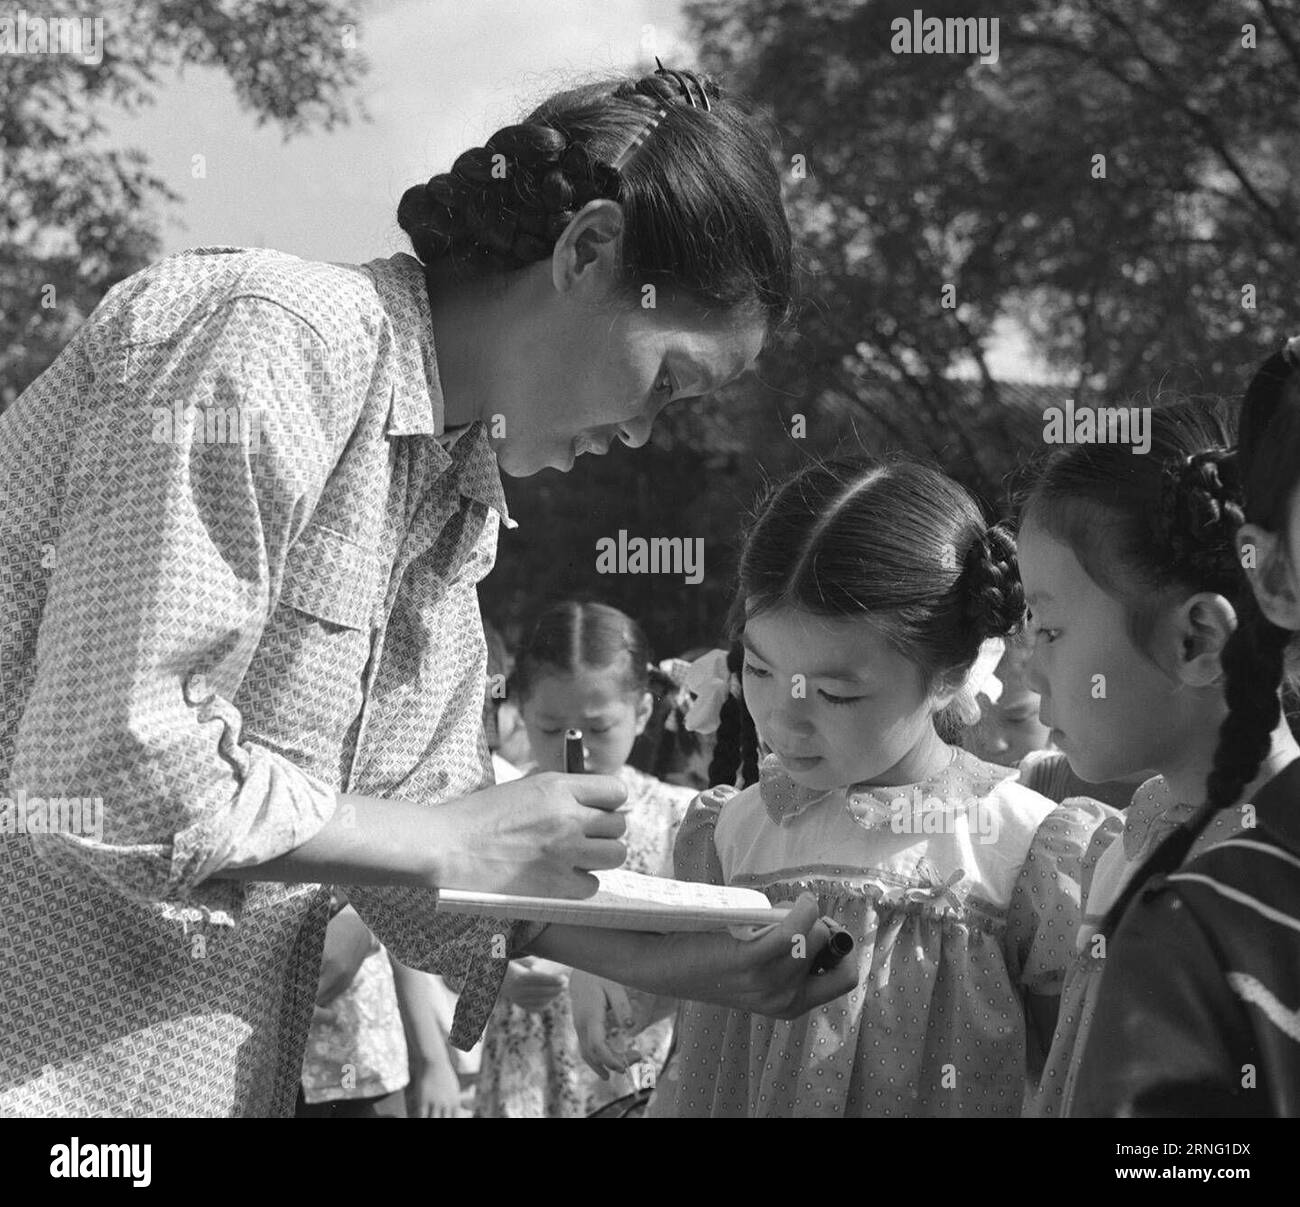 (160901) -- BEIJING, Sept. 1, 2016 -- File photo taken on Sept. 1, 1956 shows teacher Han Zemin (L) writing down names of new pupils at No. 1 Primary School of the then Dongsi District of Beijing, capital of China. ) (ry) CHINA-SCHOOL OPENING DAY-MEMORIES (CN) ShixPanqi PUBLICATIONxNOTxINxCHN   160901 Beijing Sept 1 2016 File Photo Taken ON Sept 1 1956 Shows Teacher Han Zemin l Writing Down Names of New Pupils AT No 1 Primary School of The Then Dongsi District of Beijing Capital of China Ry China School Opening Day Memories CN  PUBLICATIONxNOTxINxCHN Stock Photo